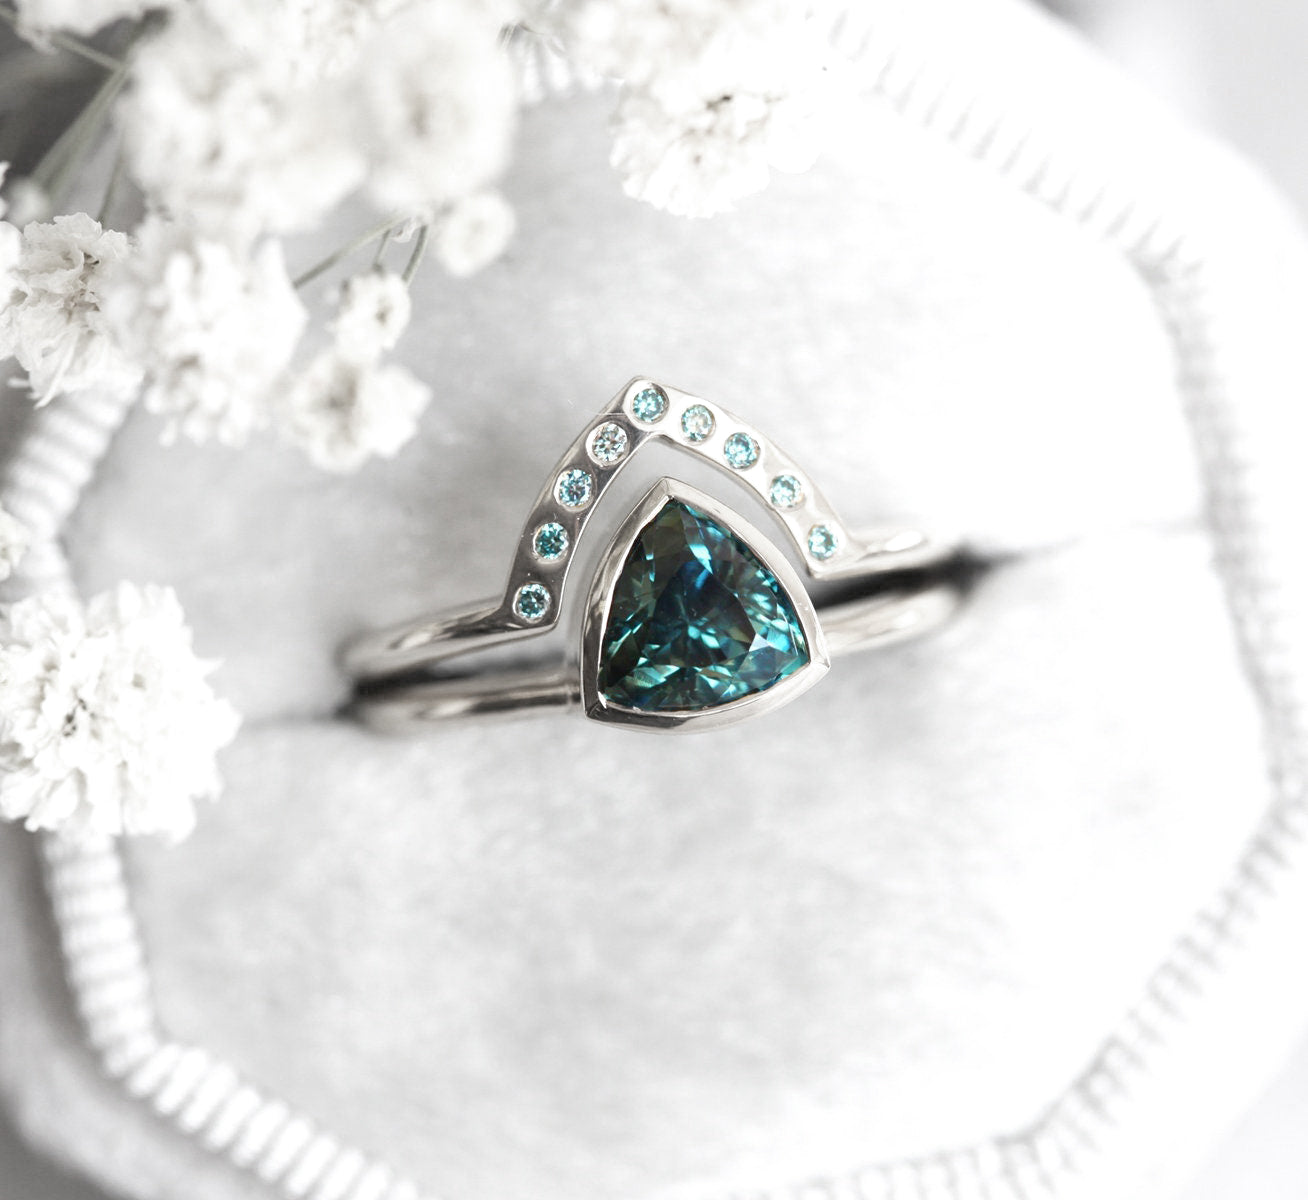 Teal Trillion Sapphire Ring With Blue Diamond Band, Trillion Sapphire Engagement Ring Solitaire With Teal Blue Diamond Ring, Matching Set-Capucinne